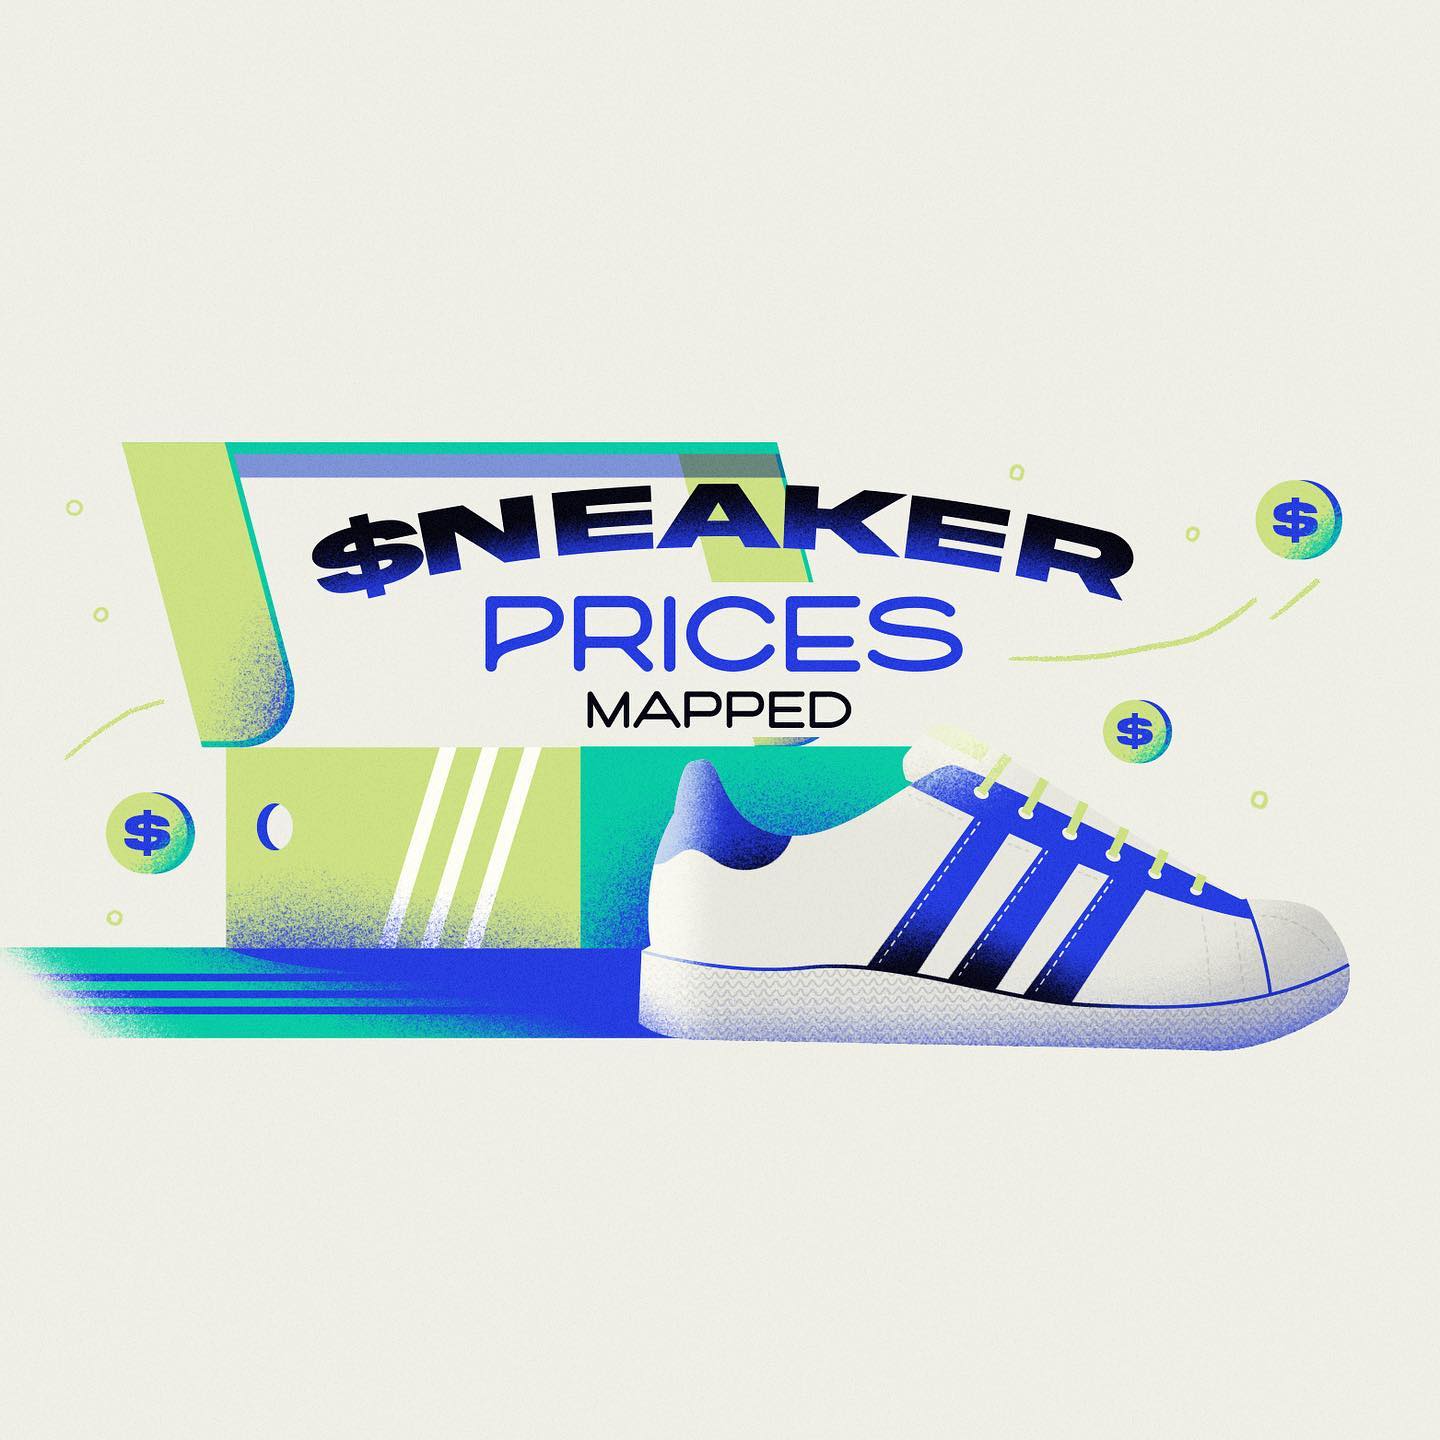 :::Sneaker prices mapped:::Editorial illustration about sneakers’ price..Adobe Illustrator+Photoshop.#editorialillustration #adidas #nike #sneakers #behance #dribbble #shoes #illustration #flatillustration #stylized #minimalillustration